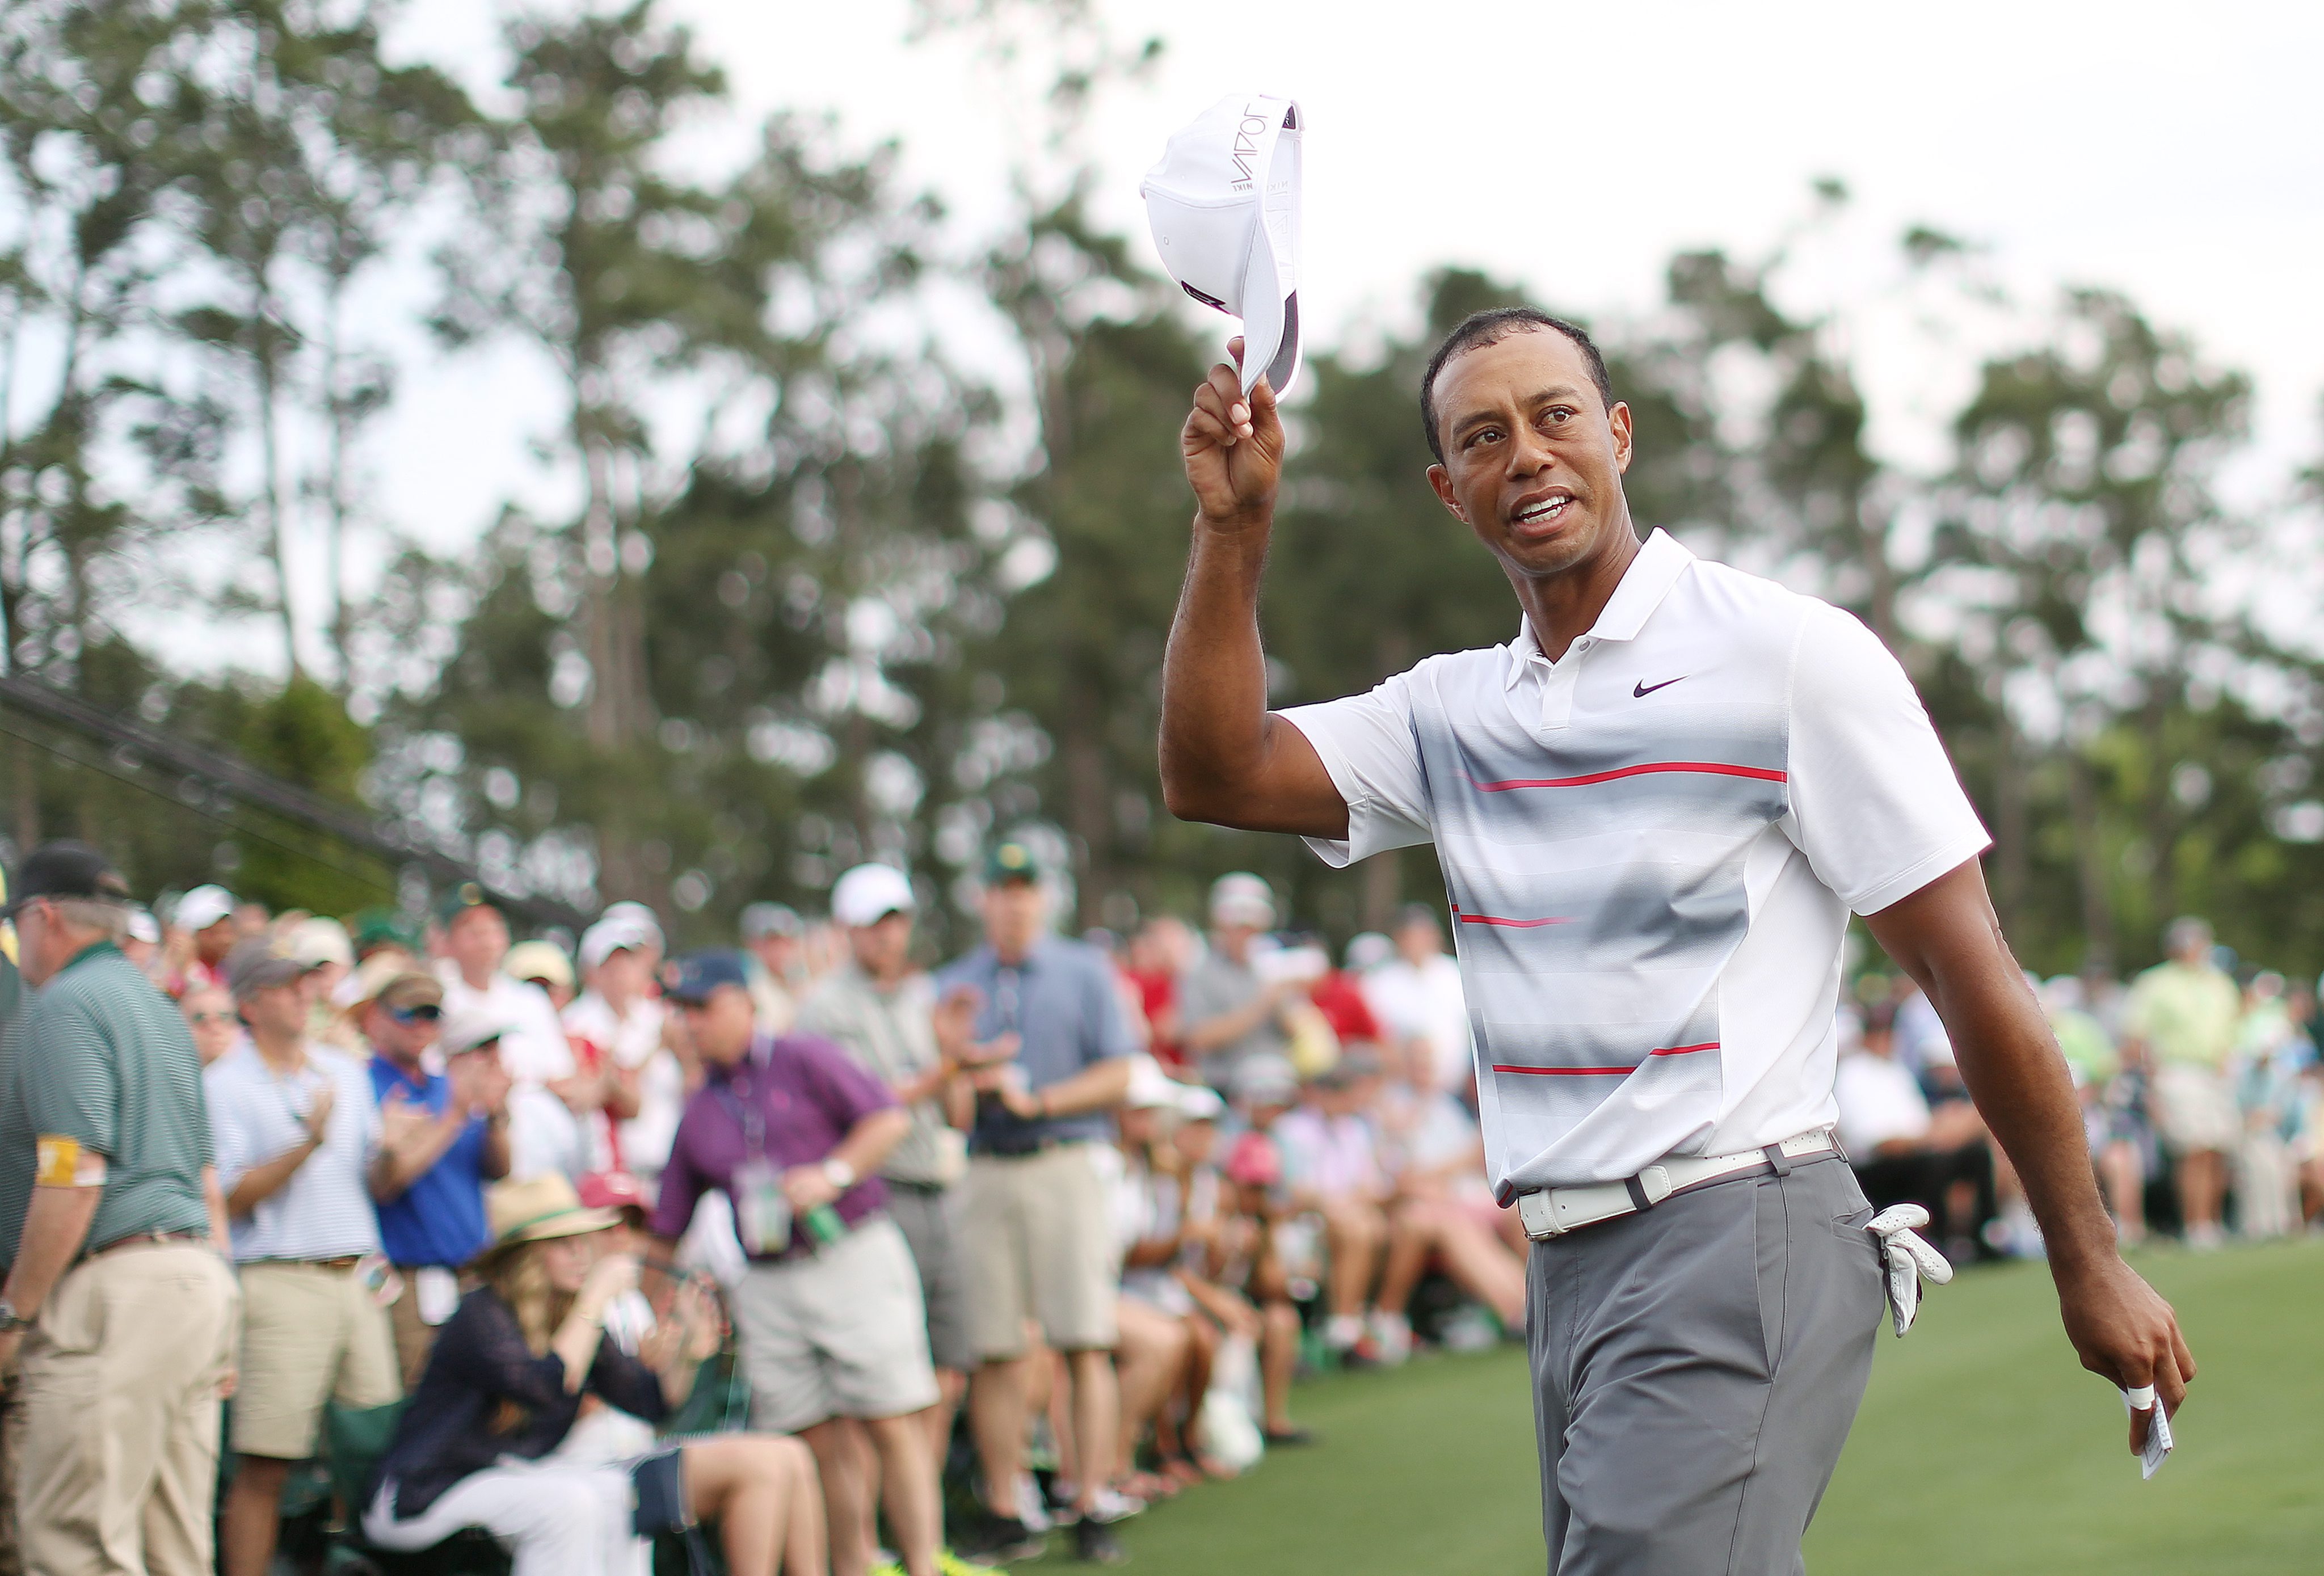 Woods tips his hat after finishing his round. Photo: EPA